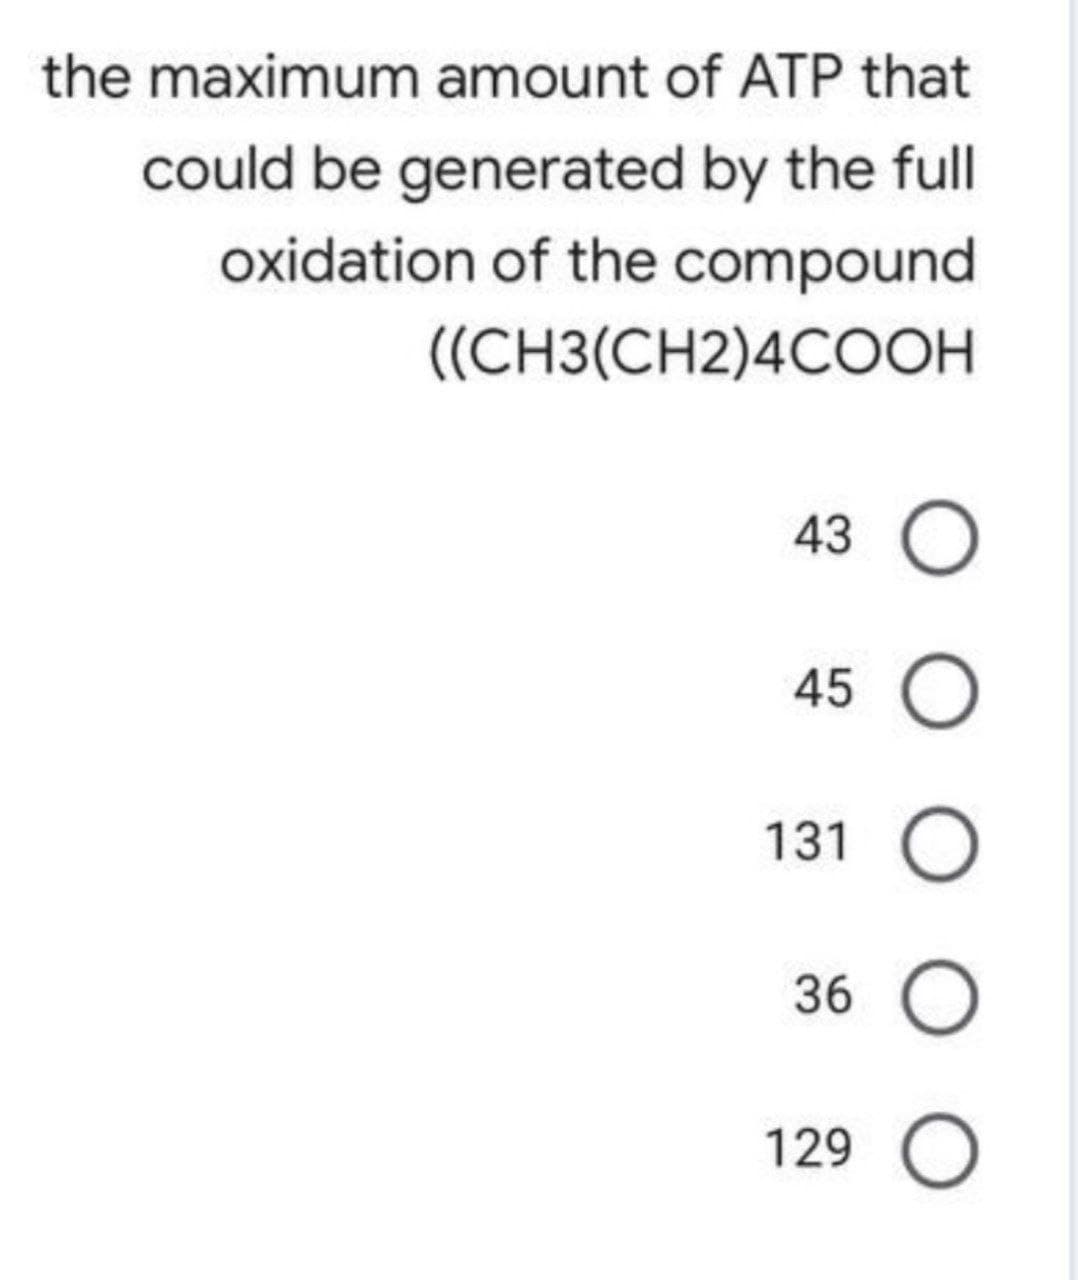 the maximum amount of ATP that
could be generated by the full
oxidation of the compound
((CH3(CH2)4COOH
43 O
45 O
131 O
36 O
129 O